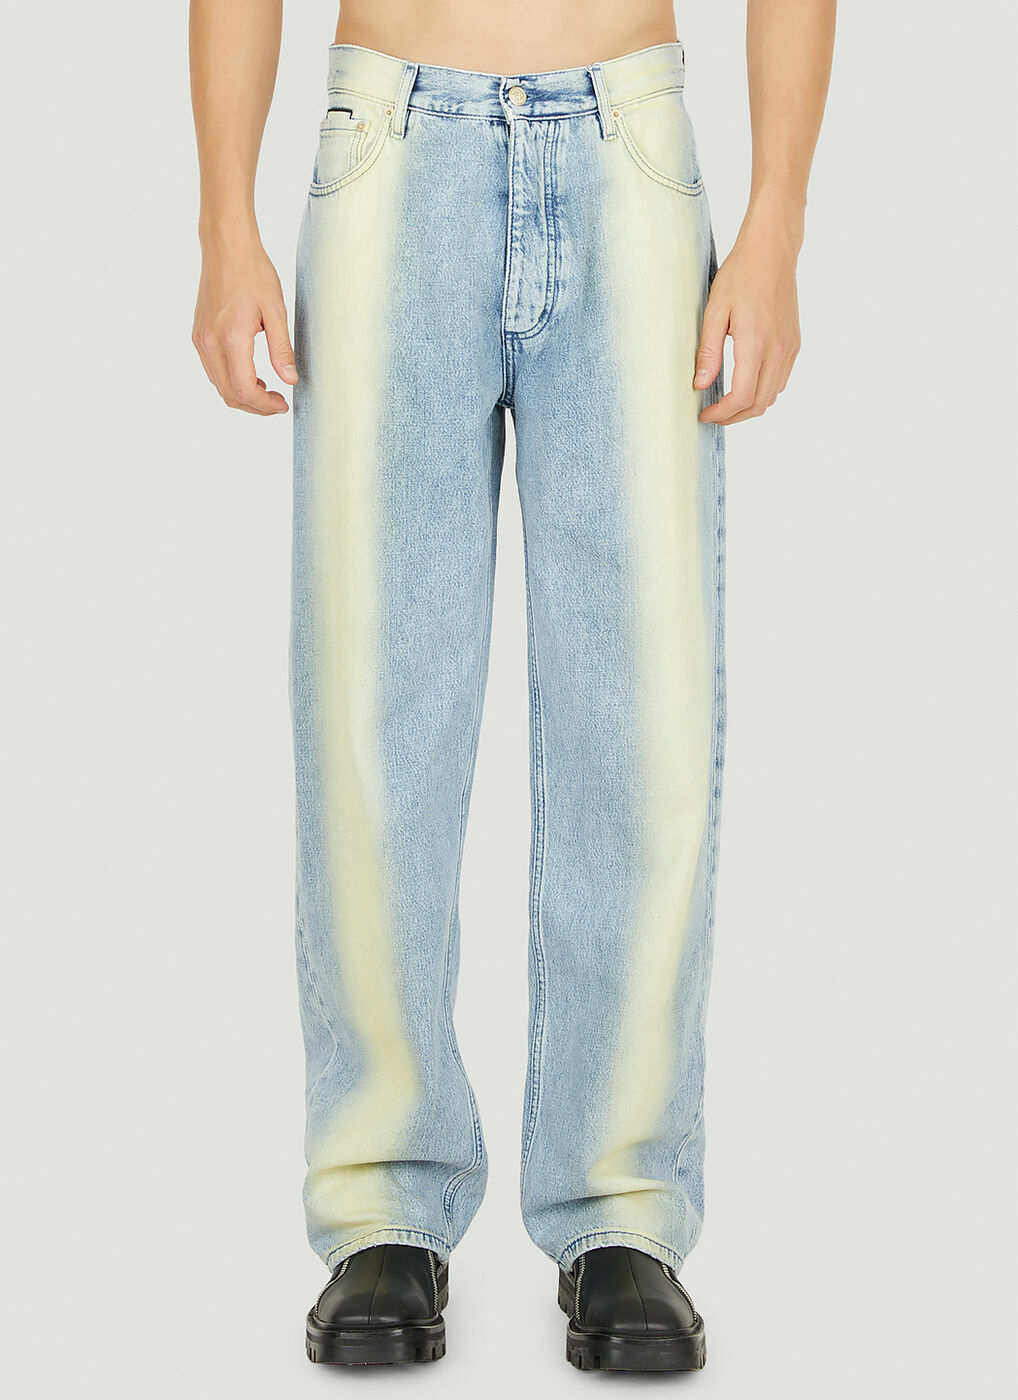 Benz Limone Jeans in Blue Eytys